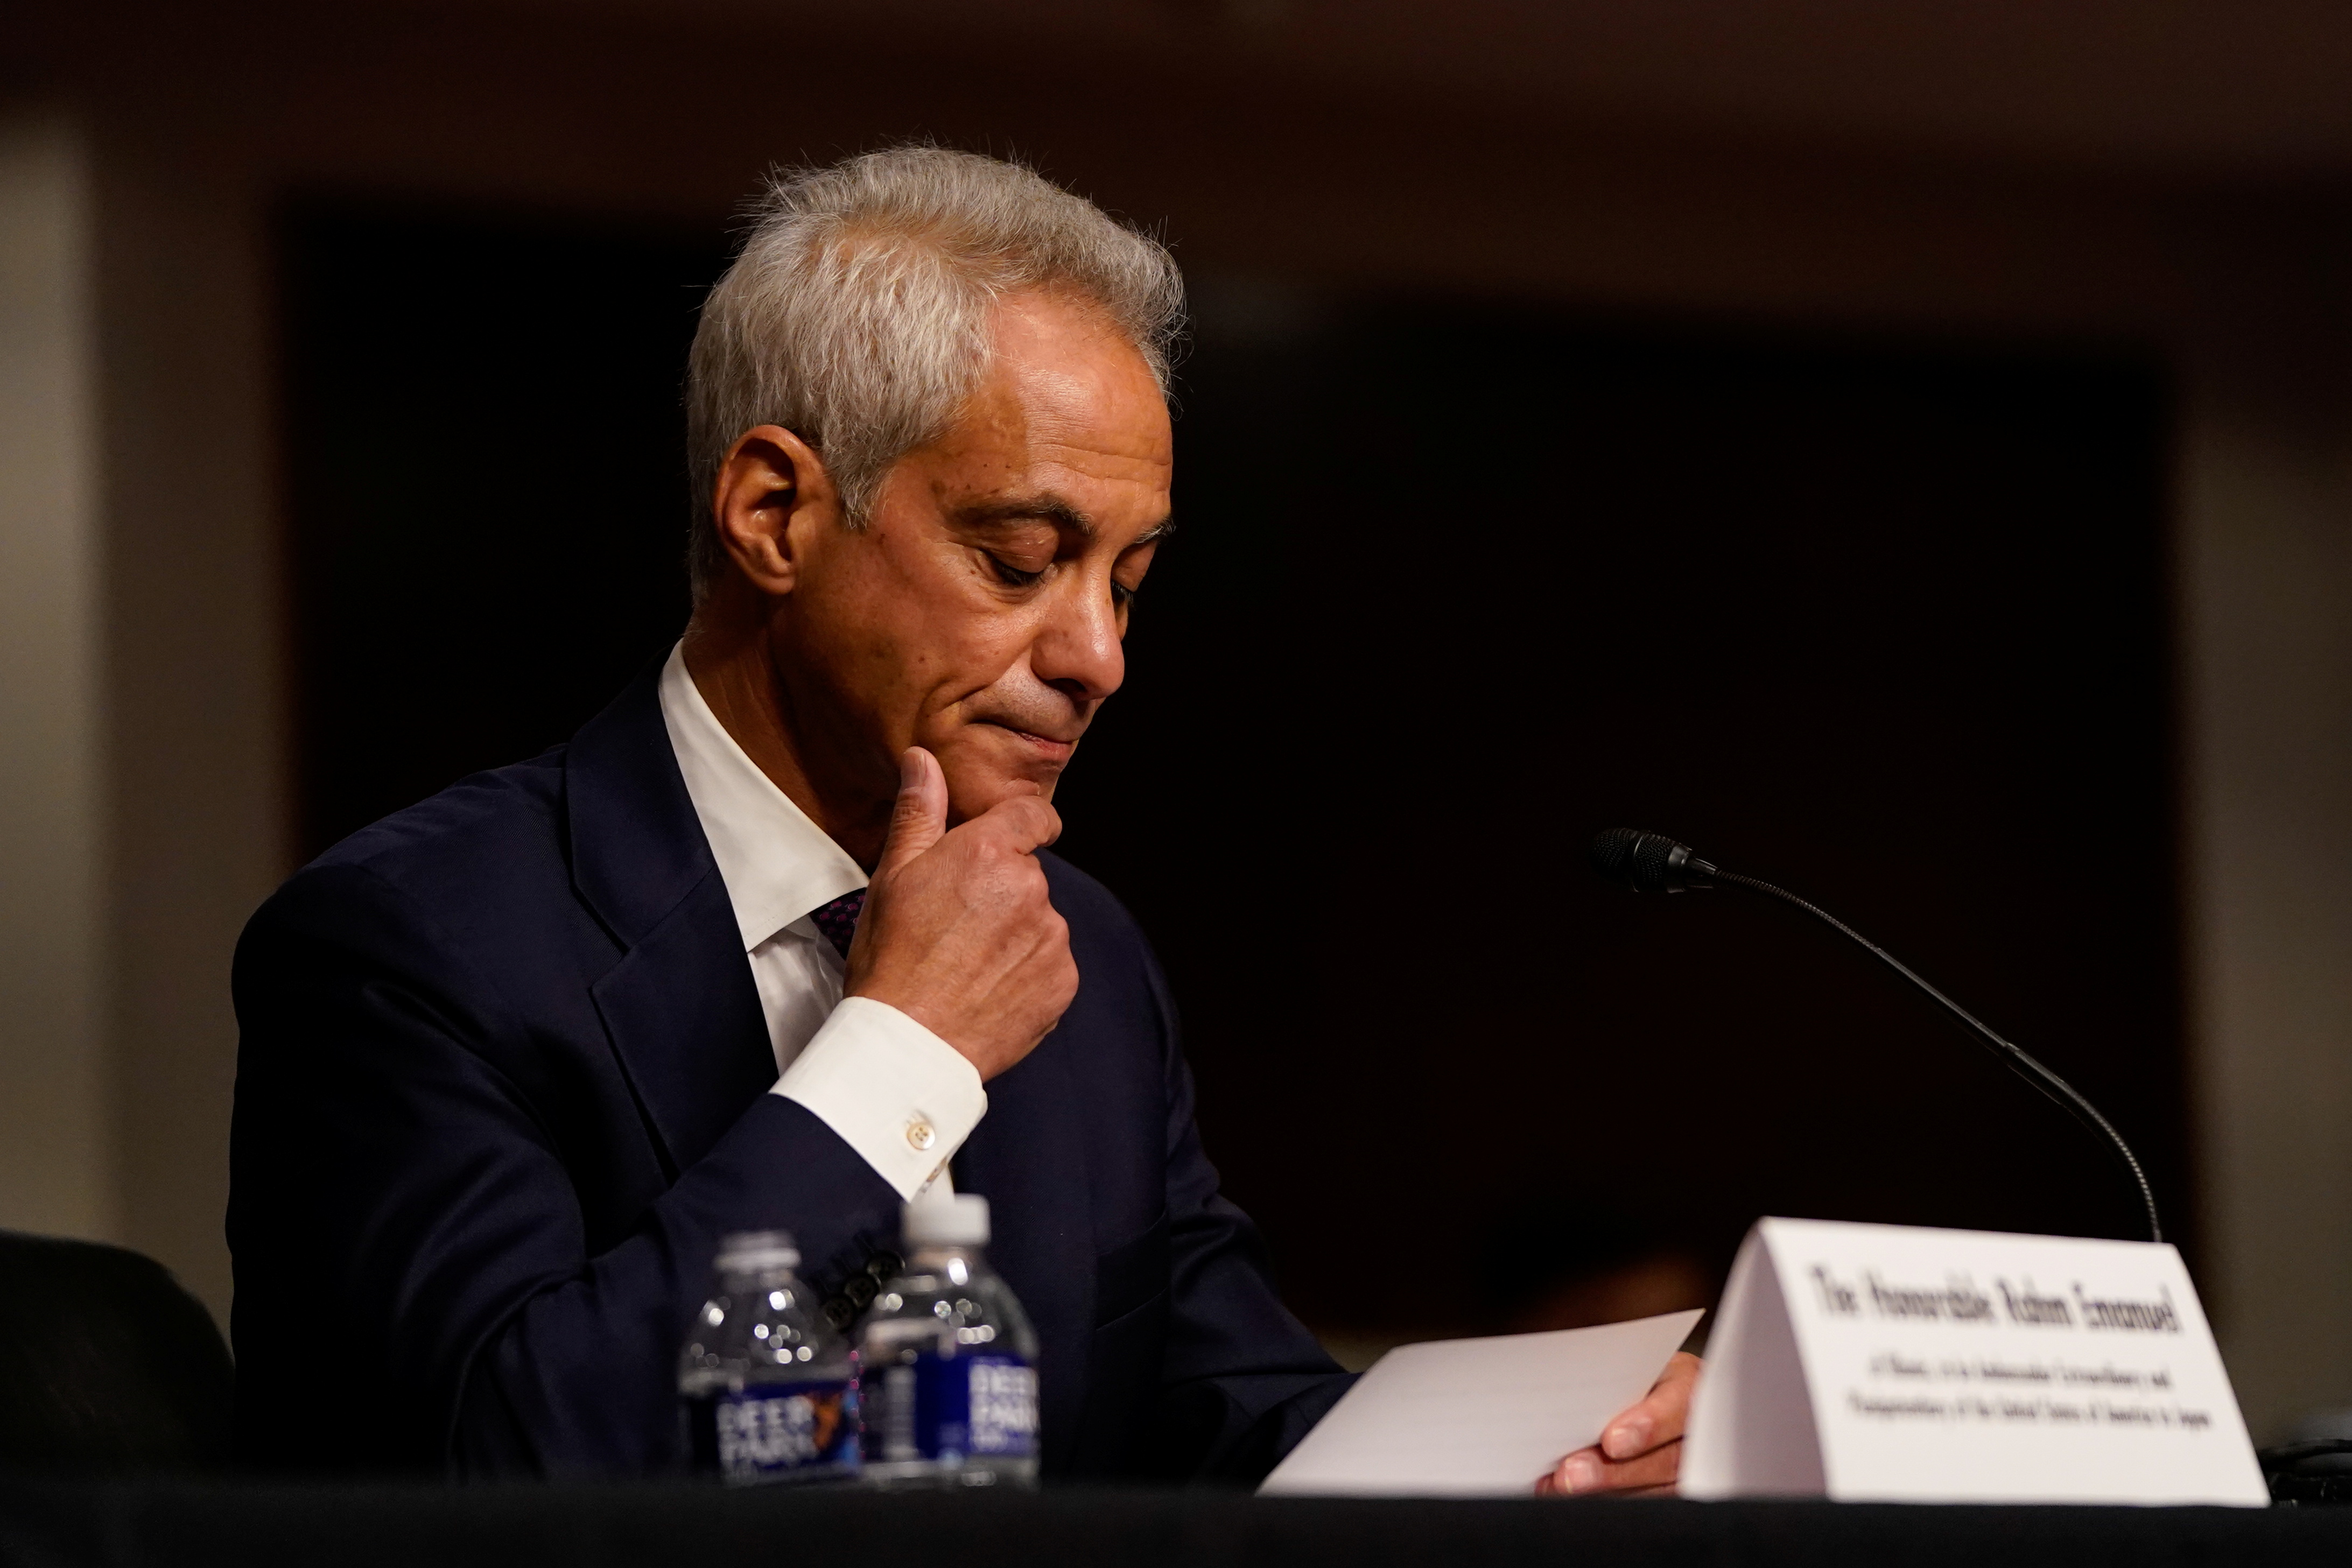 Former Chicago Mayor Rahm Emanuel pauses while giving his opening statement during the Senate Foreign Relations Committee hearing on his nomination to be the United States Ambassador to Japan, on Capitol Hill in Washington, U.S., October 20, 2021. REUTERS/Elizabeth Frantz